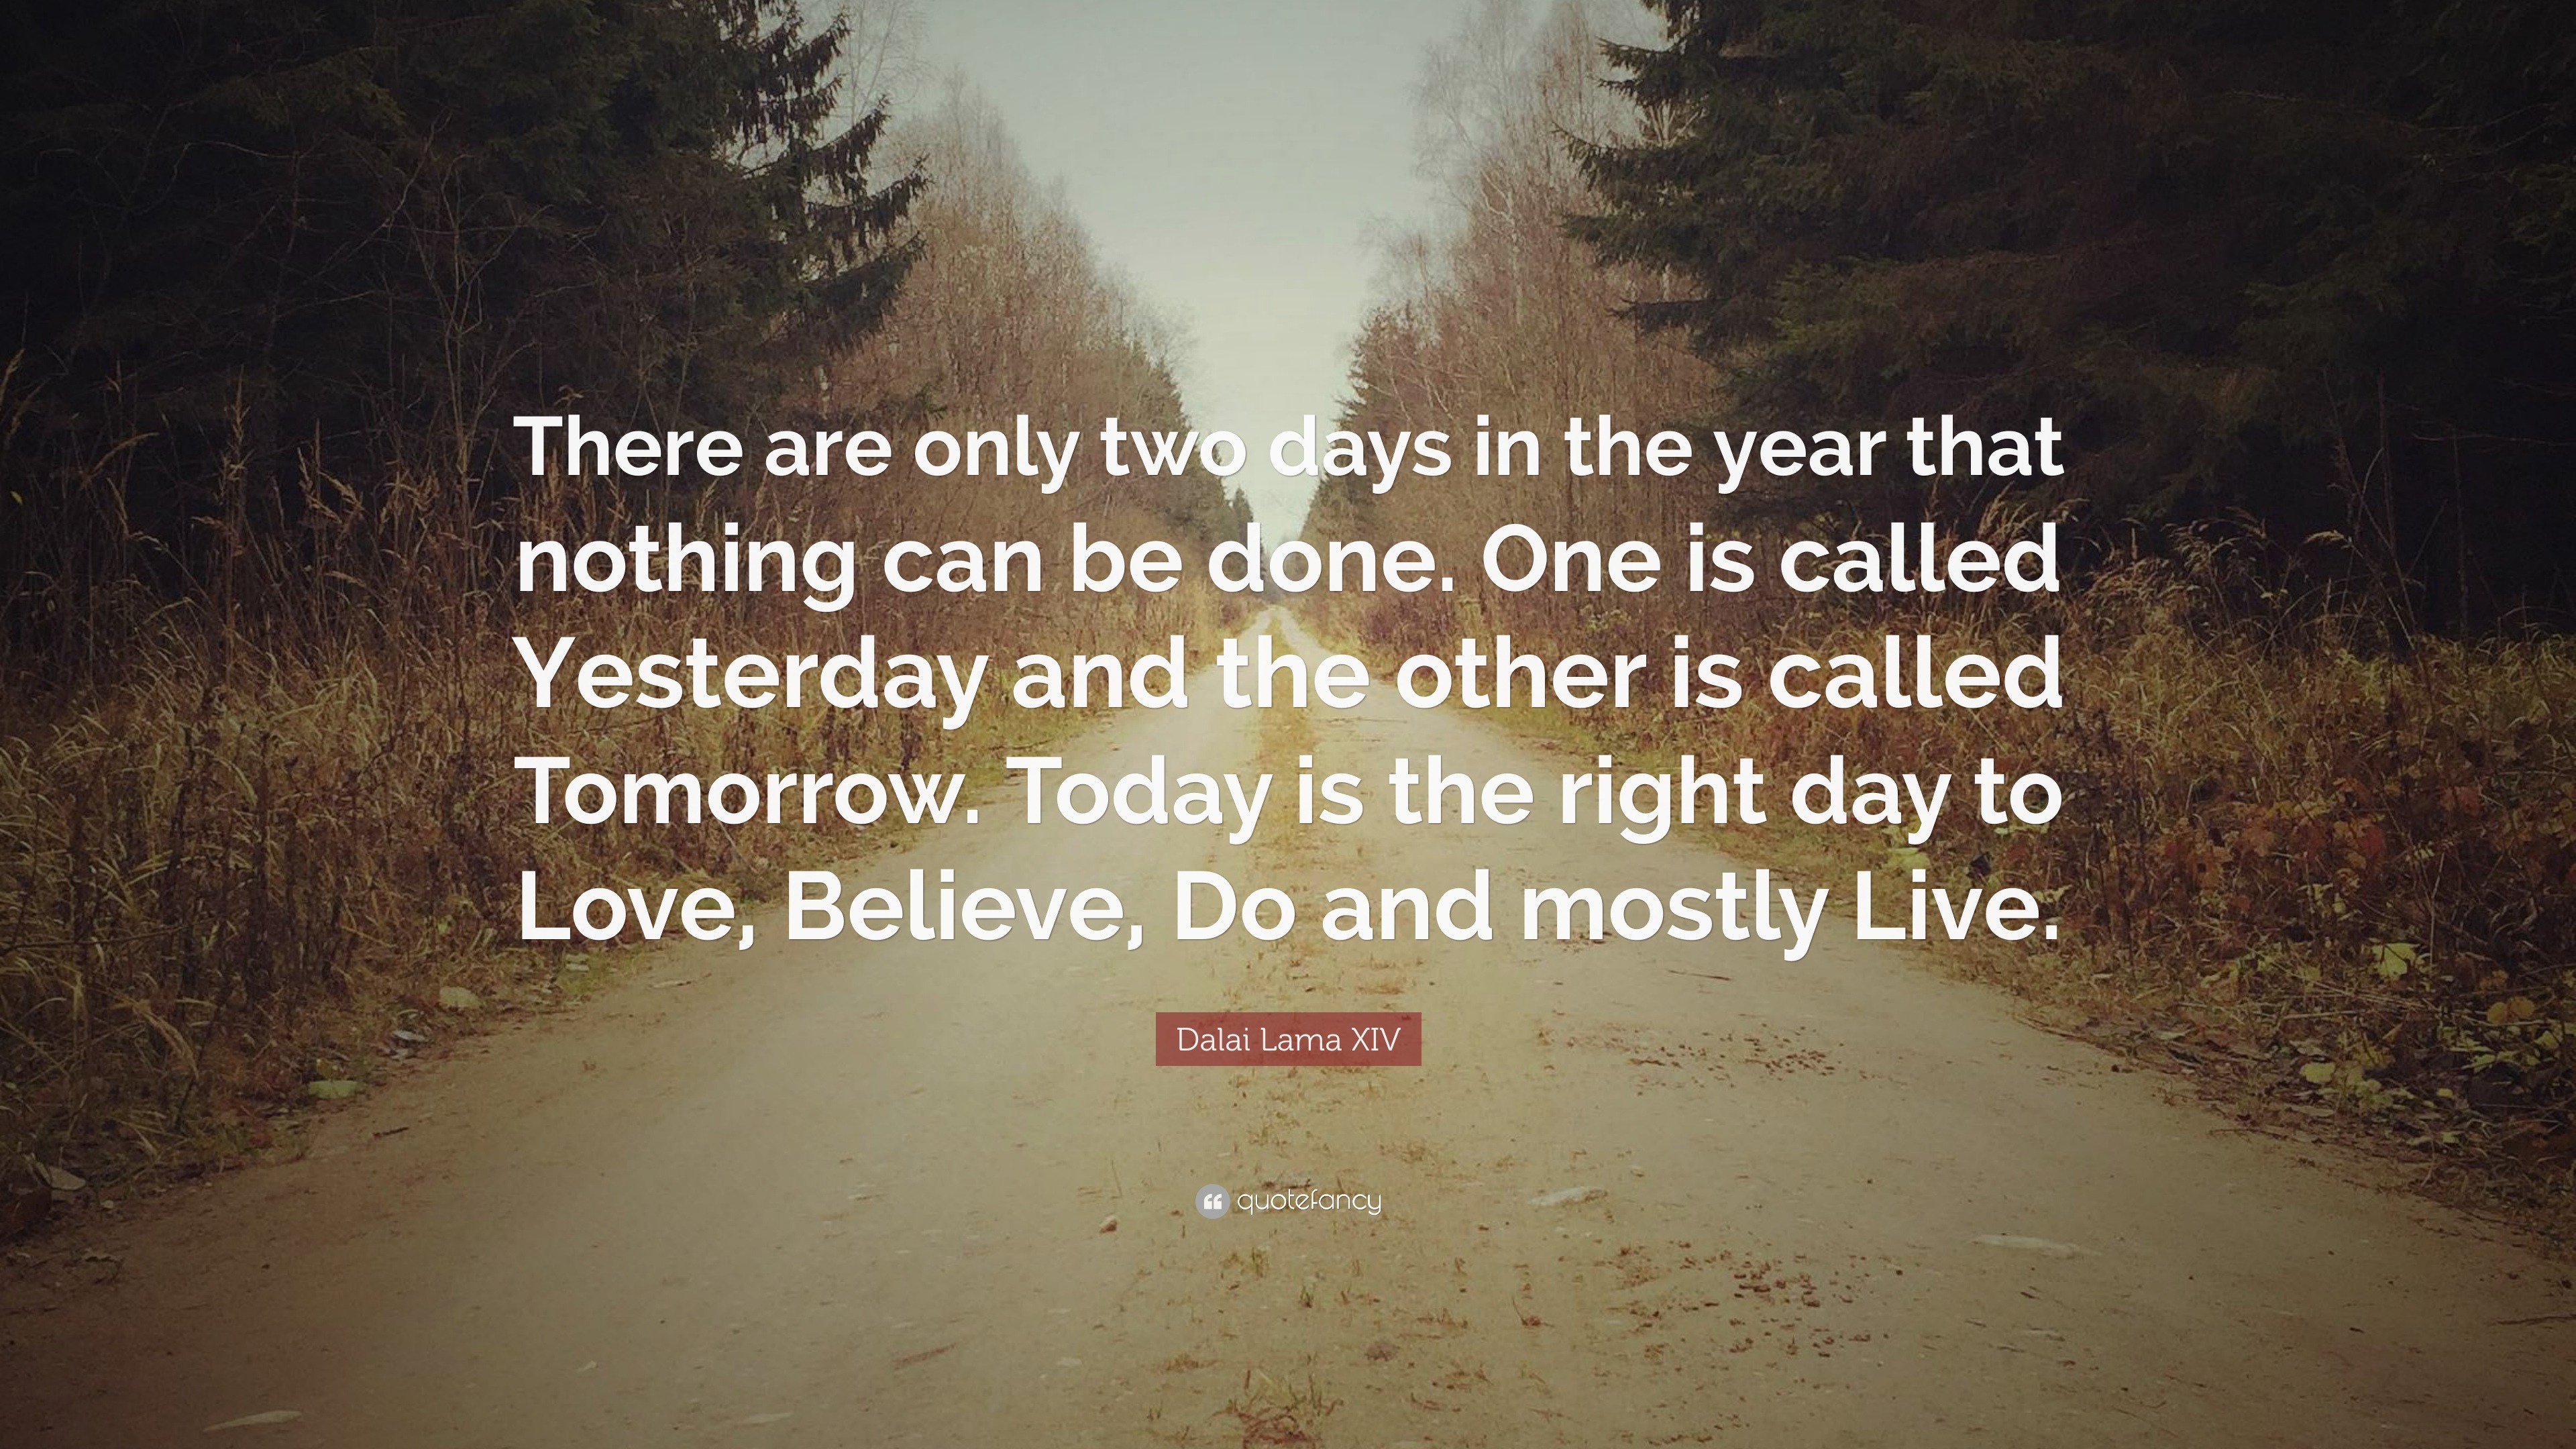 dalai lama quotes two days of the year